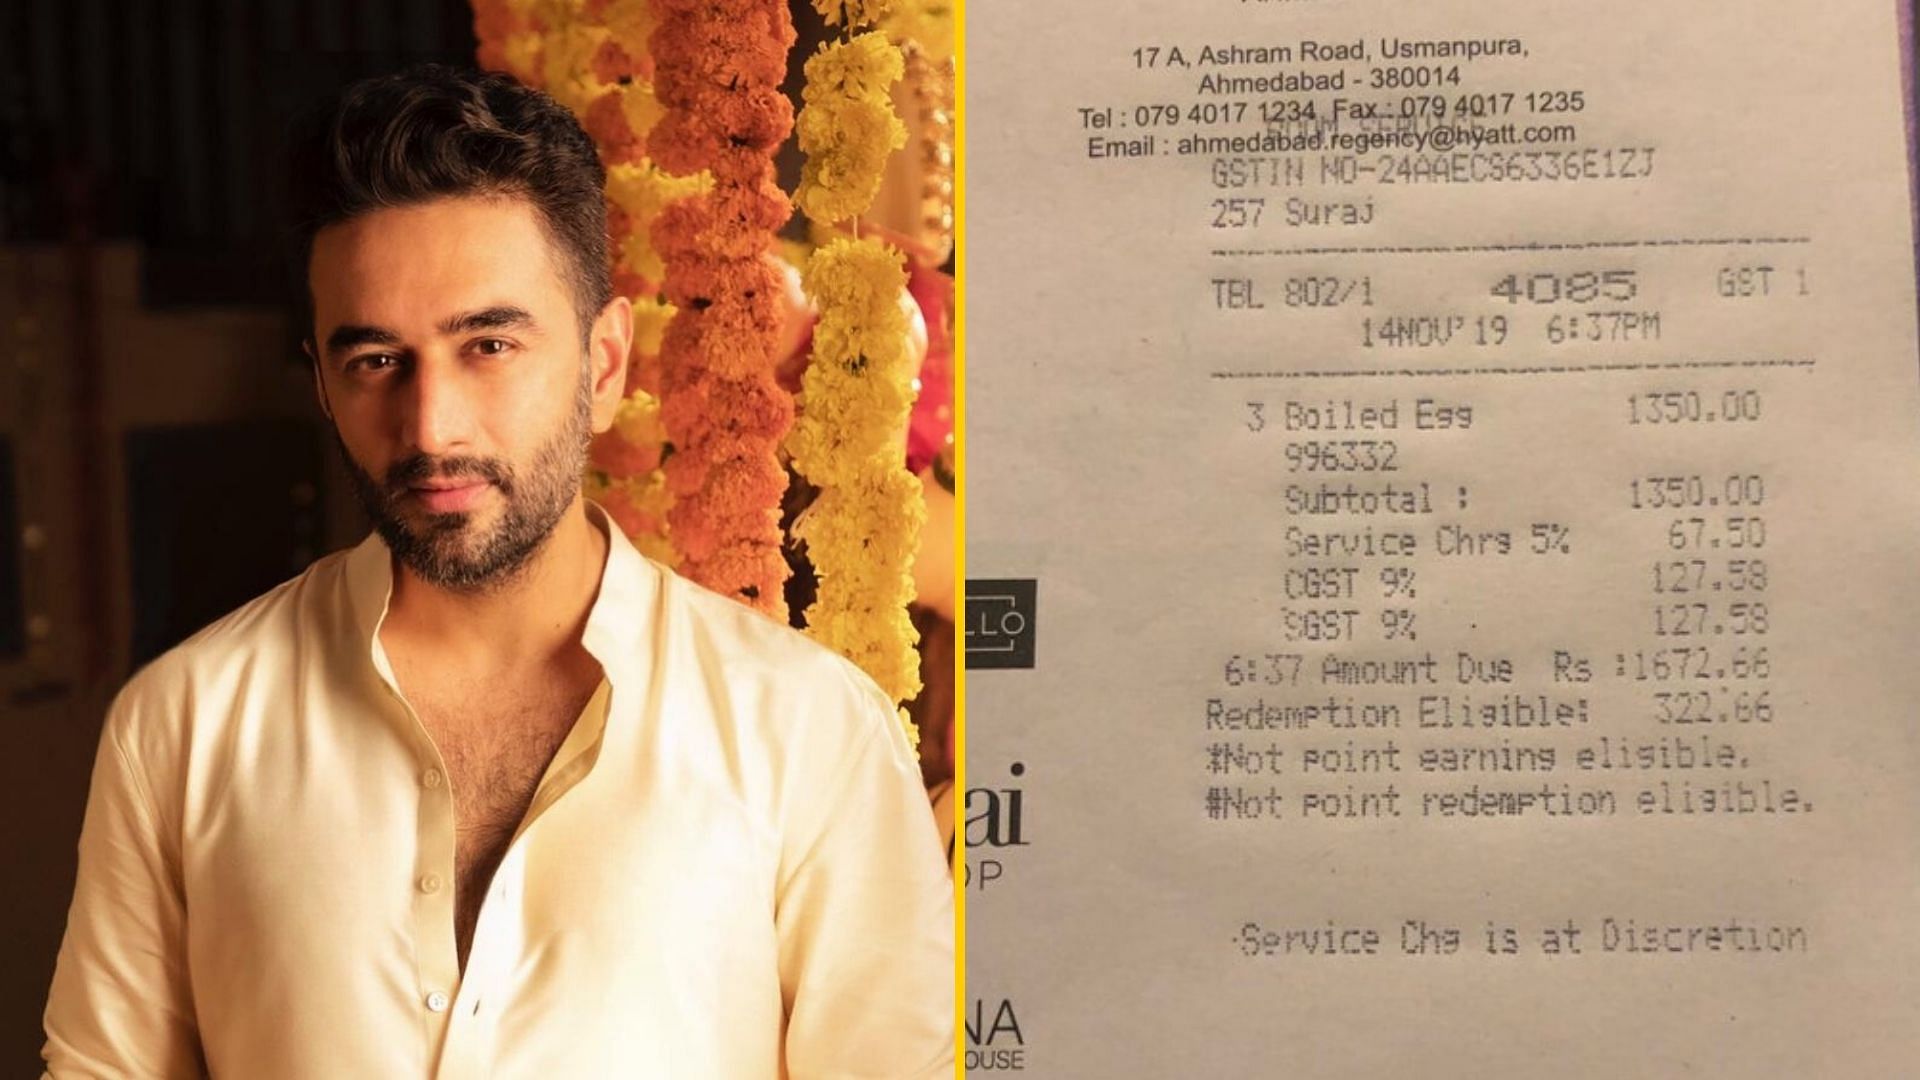 Shekhar Ravjiani says he was charged an exorbitant amount for eggs at a five-star hotel.